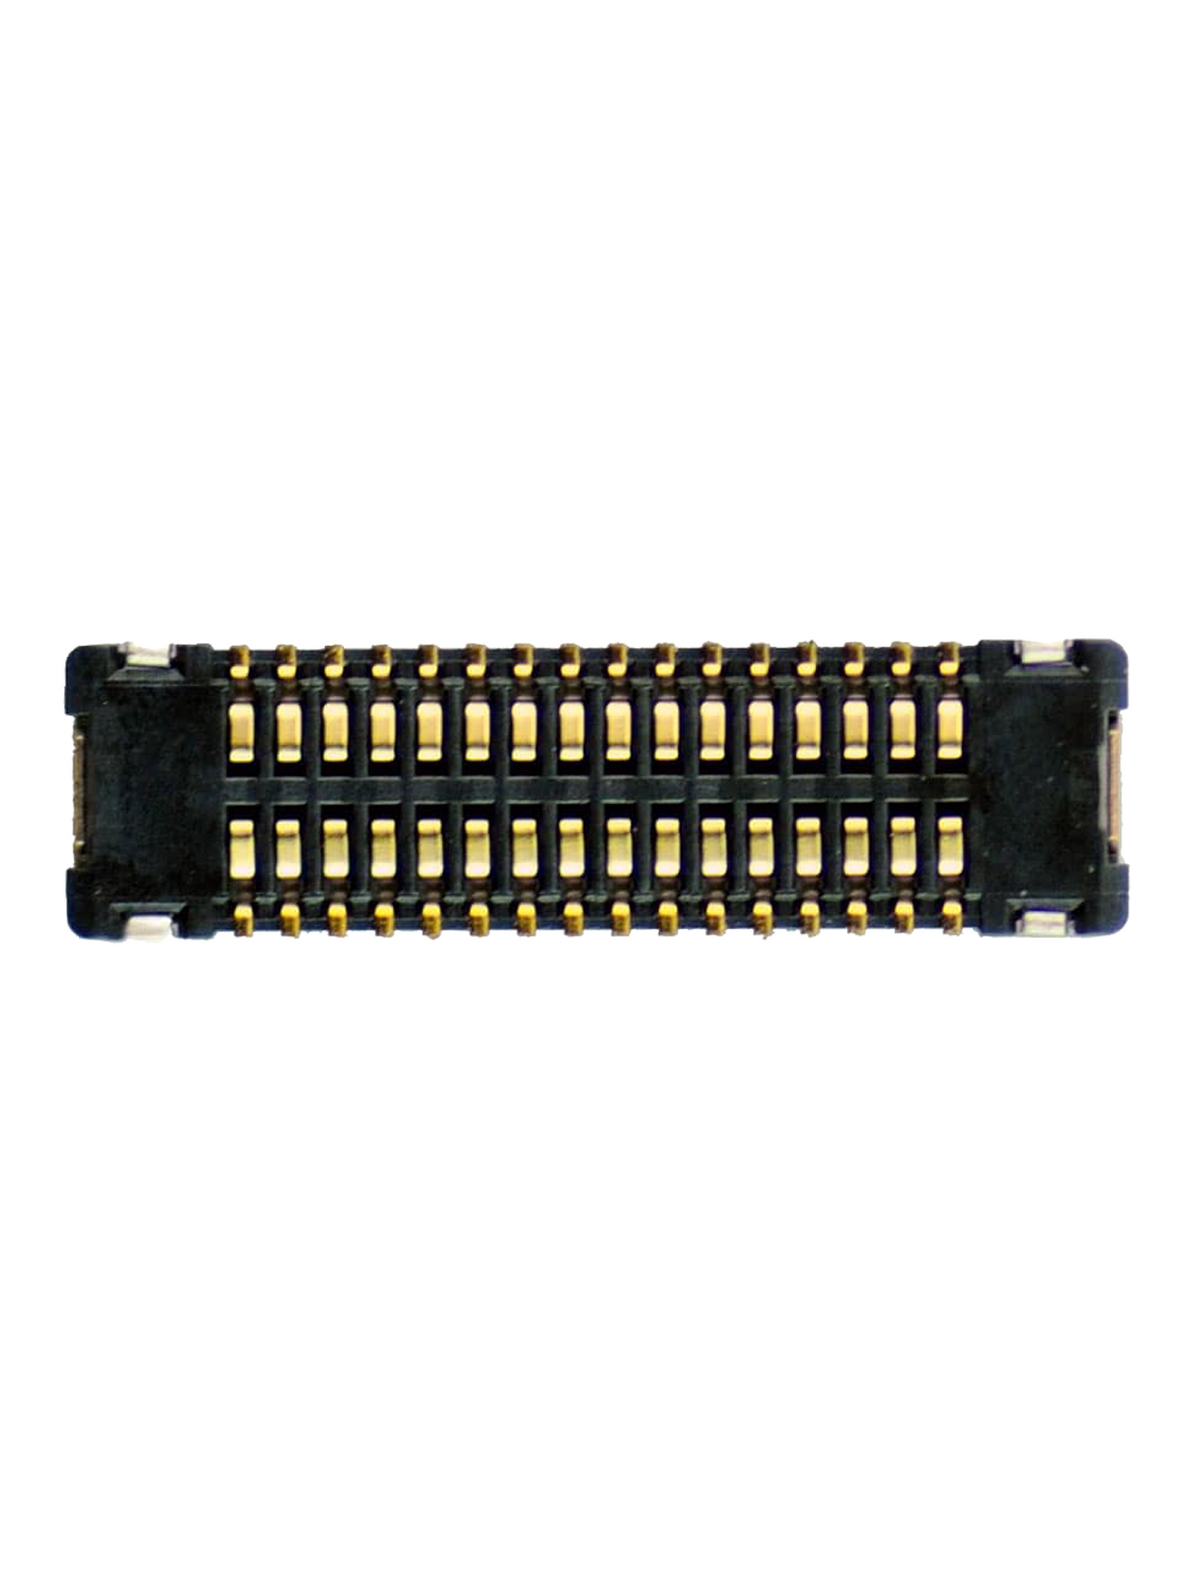 LCD FPC CONNECTOR (32 PIN) FOR IPAD MINI 1 / 2 / 3 (J2201:)